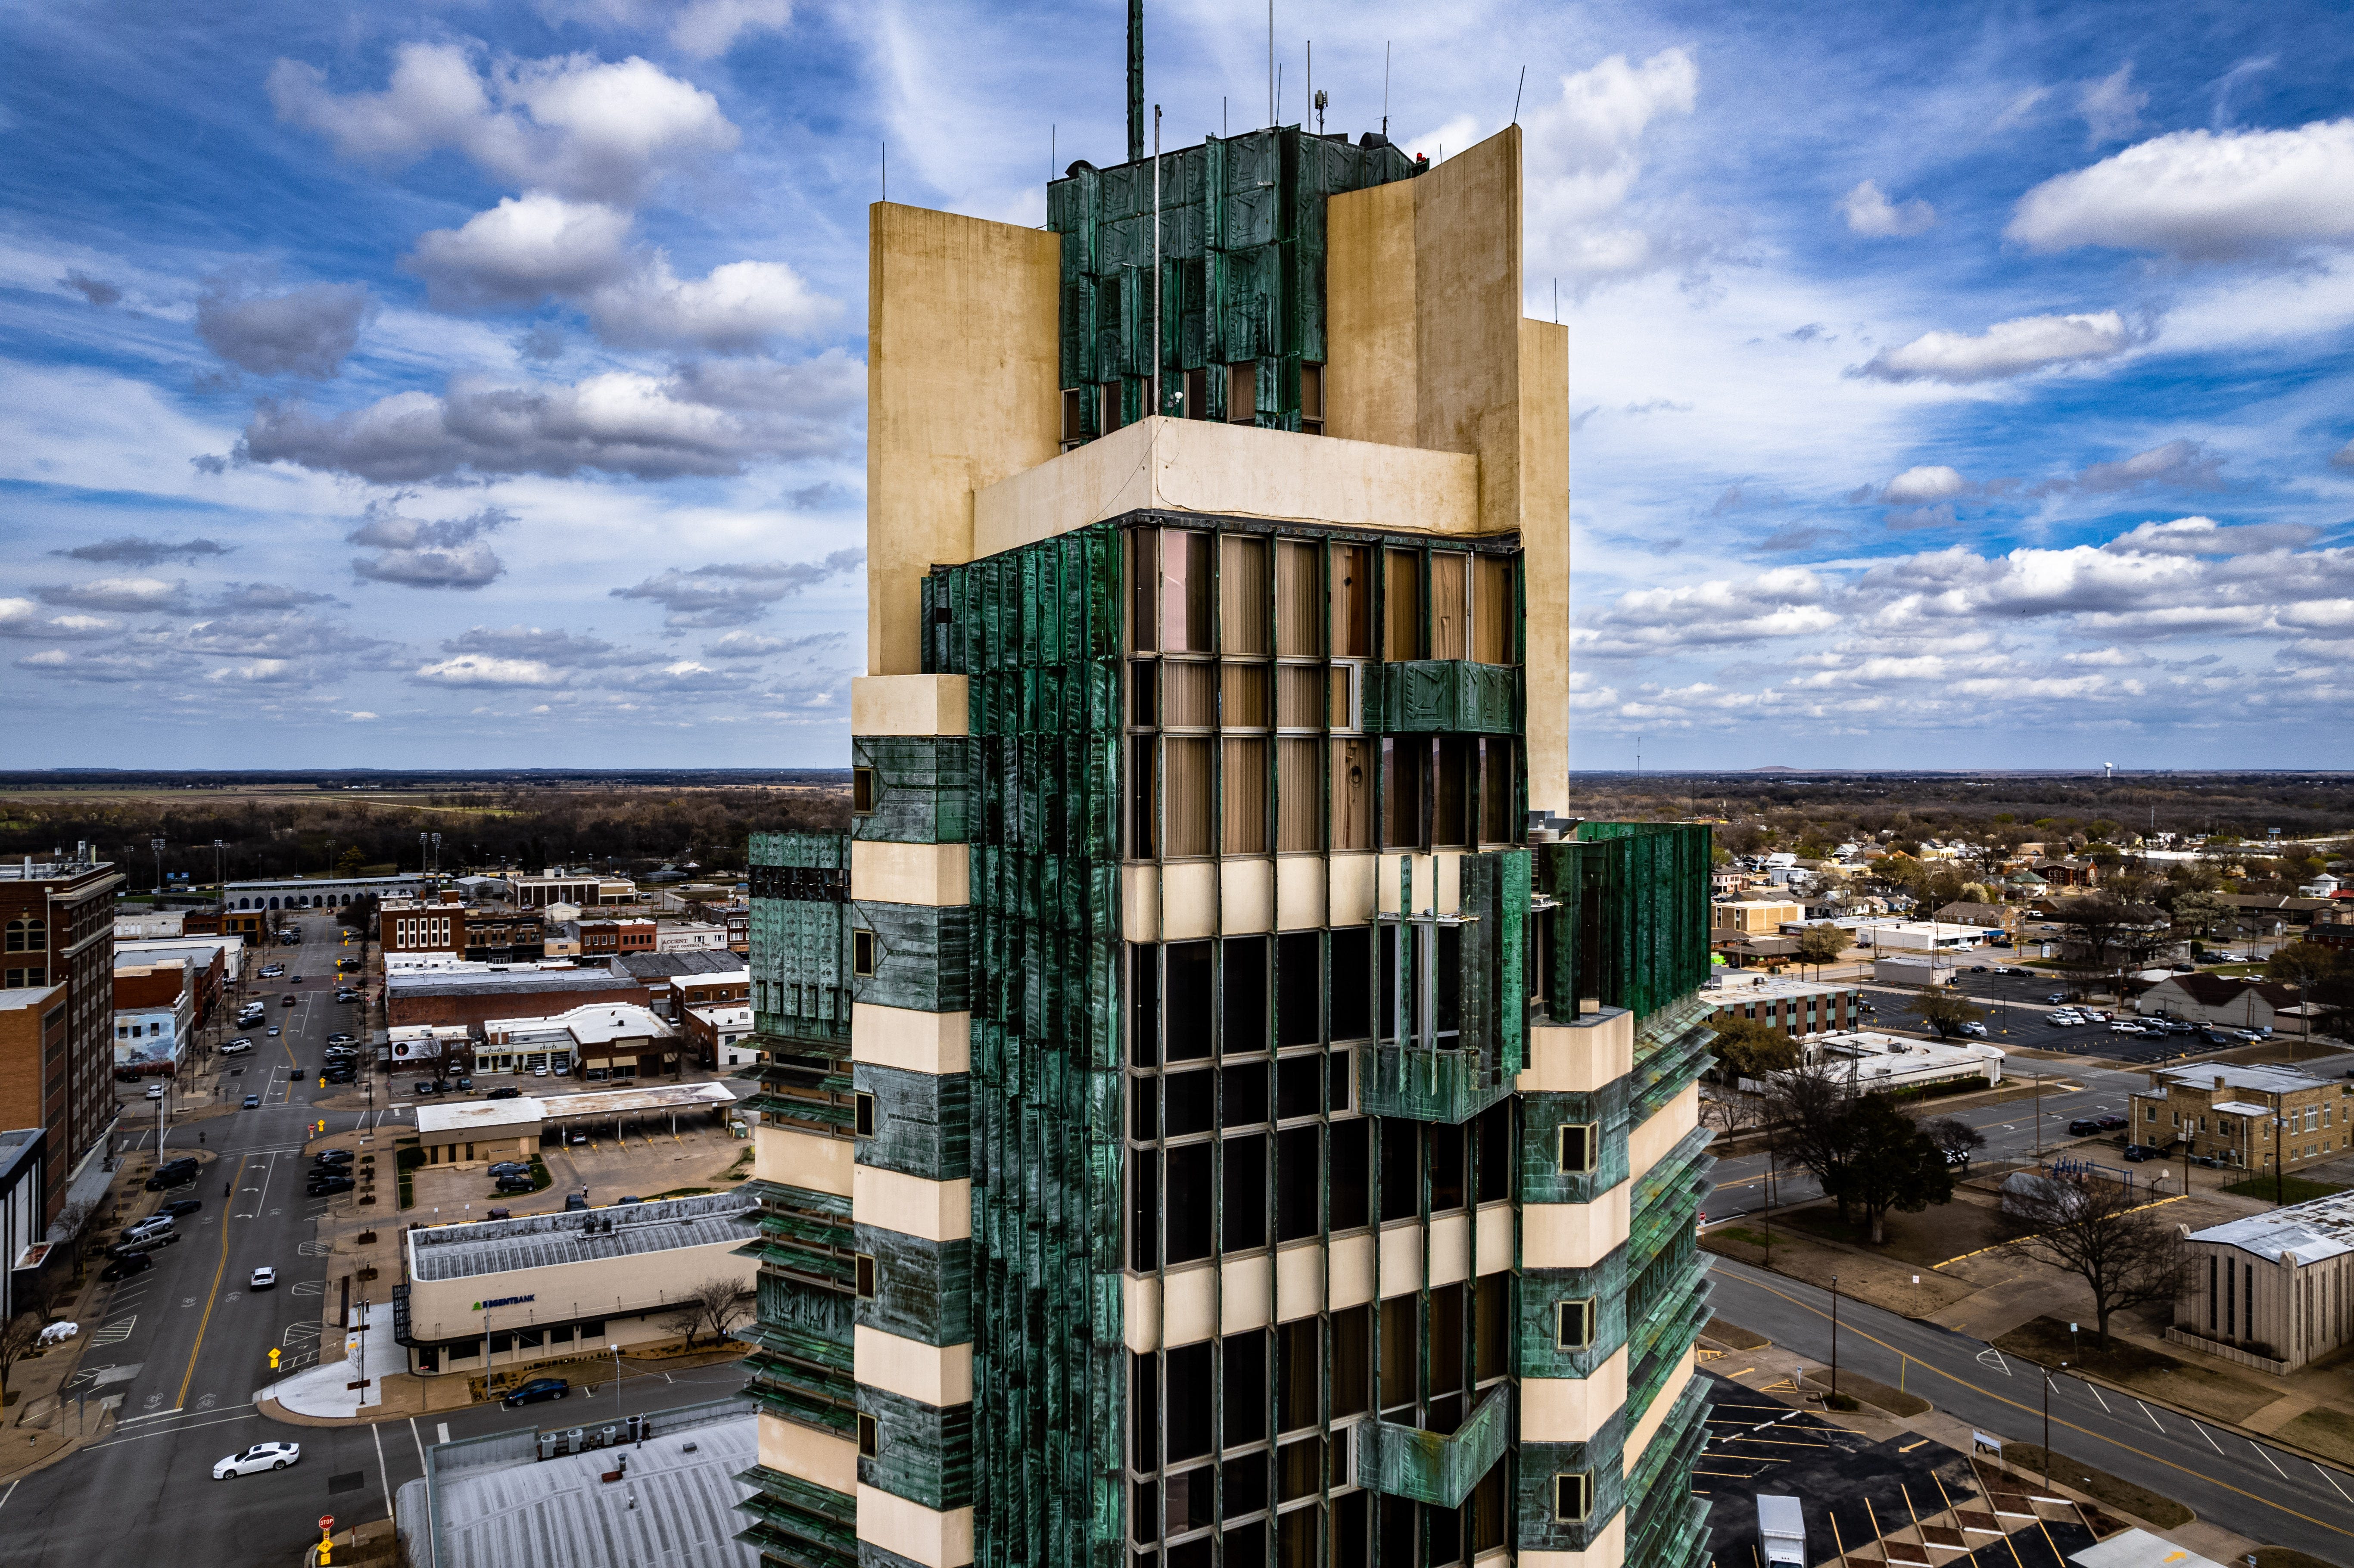 Price Tower stakeholders accuse Blanchards of dodging debts, claim they're owed $200K plus